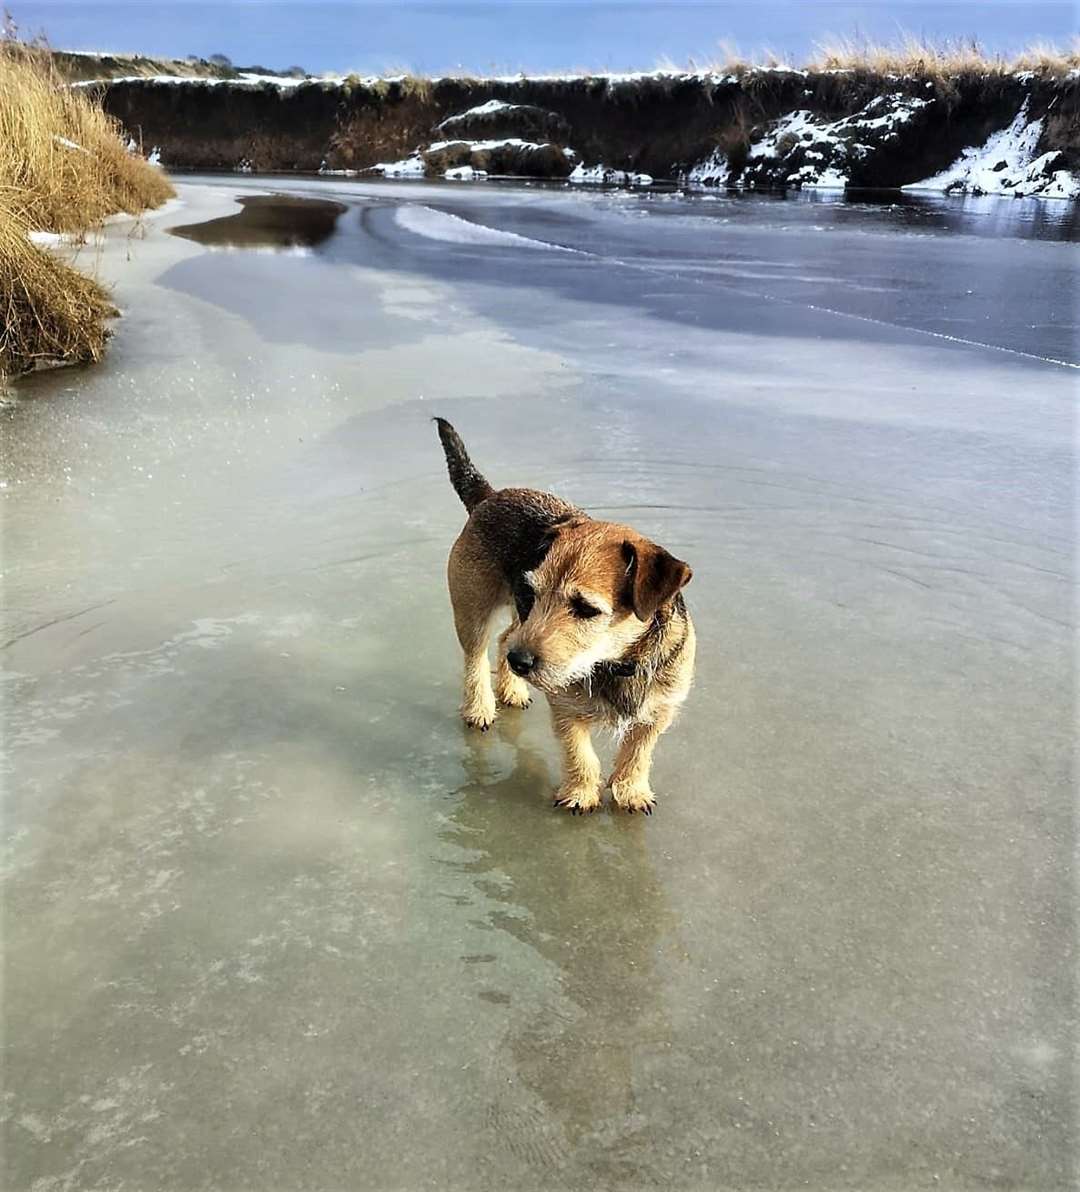 Dogs can stray on to frozen stretches of water and get into trouble as well.